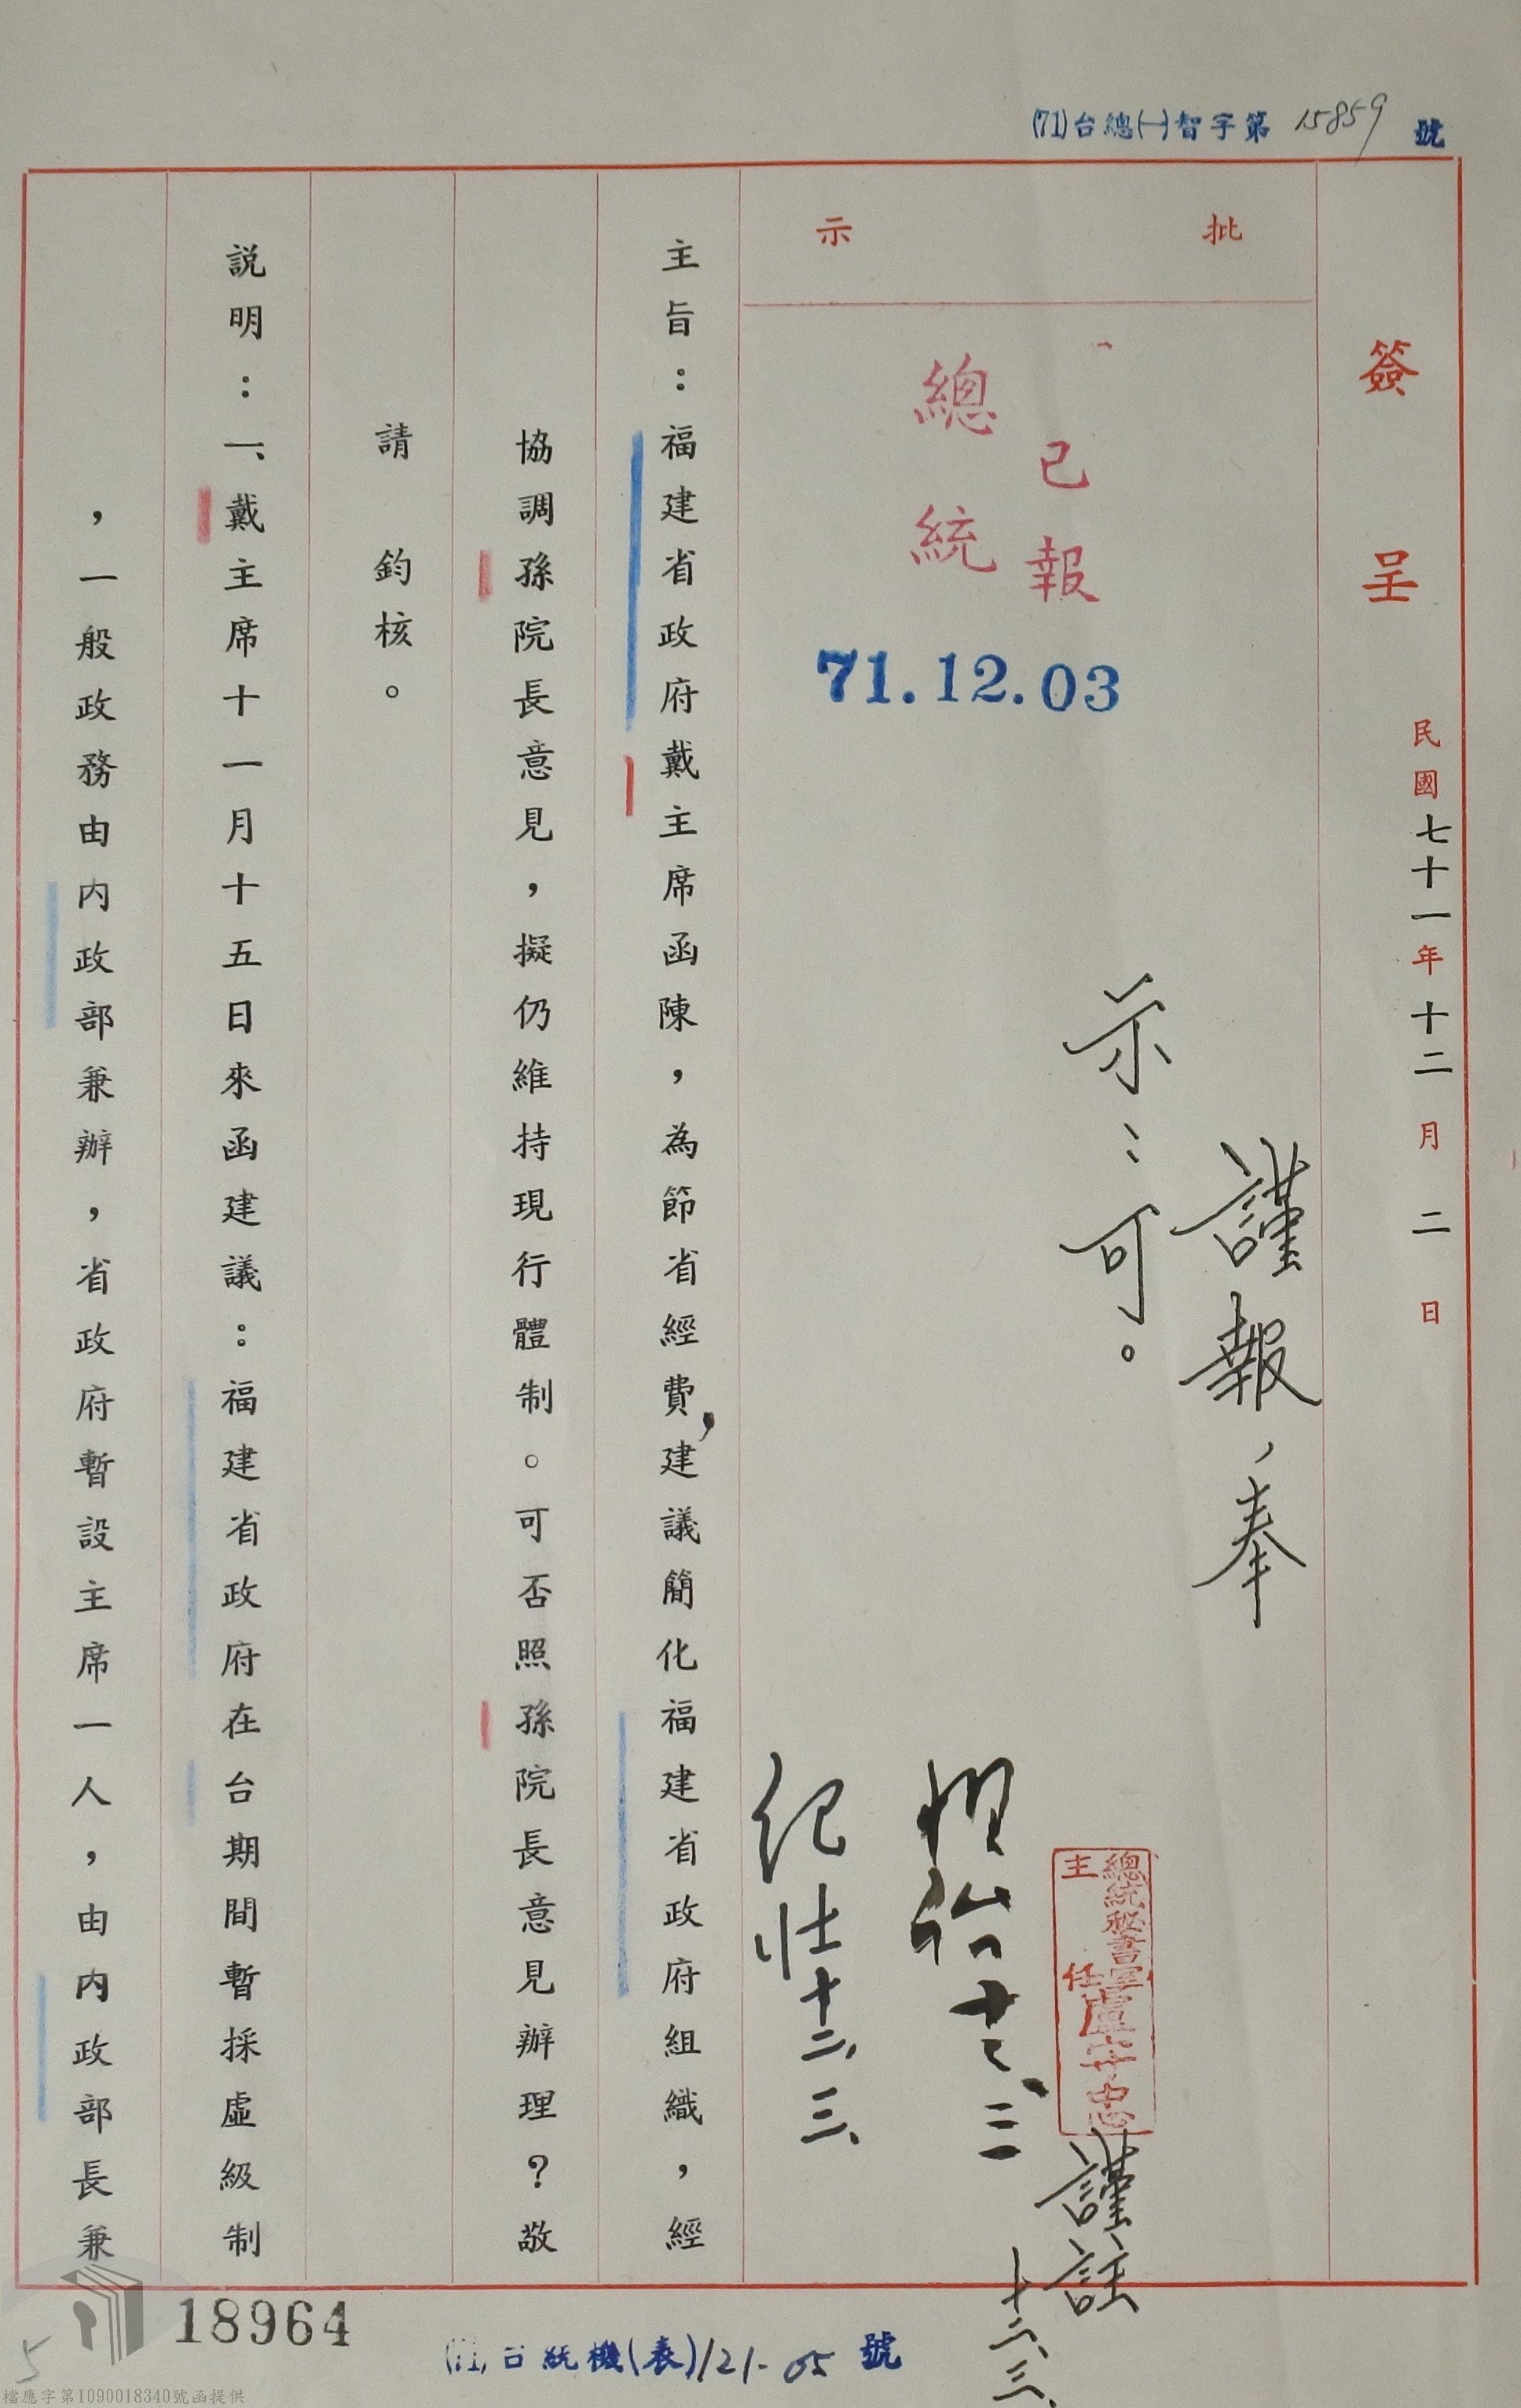 In January 1982, Governor Tai Chung-yu of Fujian Provincial Government advised President Chiang Ching-kuo to simplify the organizational structure of Fujian Provincial Government.